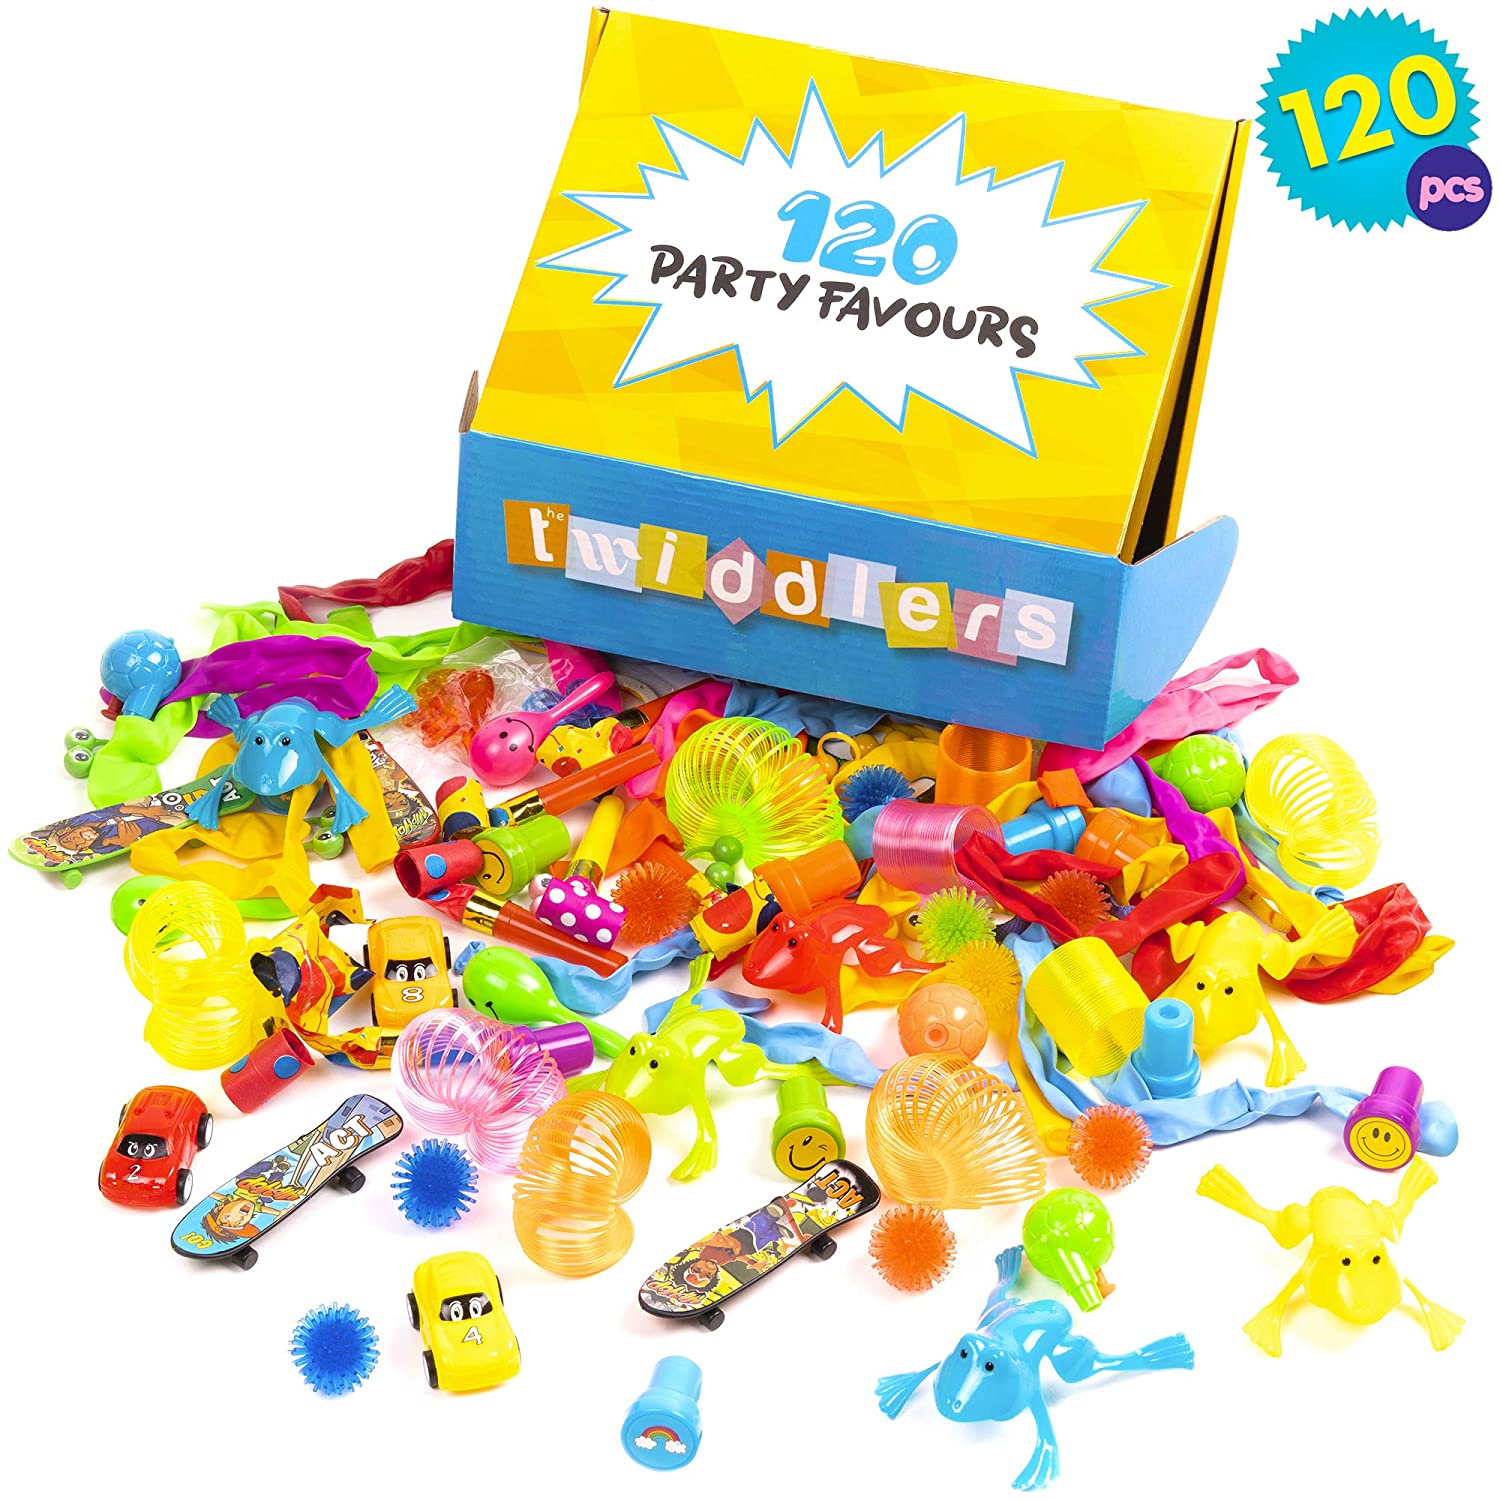 THE TWIDDLERS - 120 Party Bag Fillers for Kids, Huge Assortment of Toys for  Boys and Girls, Perfect for Birthday Pinata, Stocking Cracker Fillers